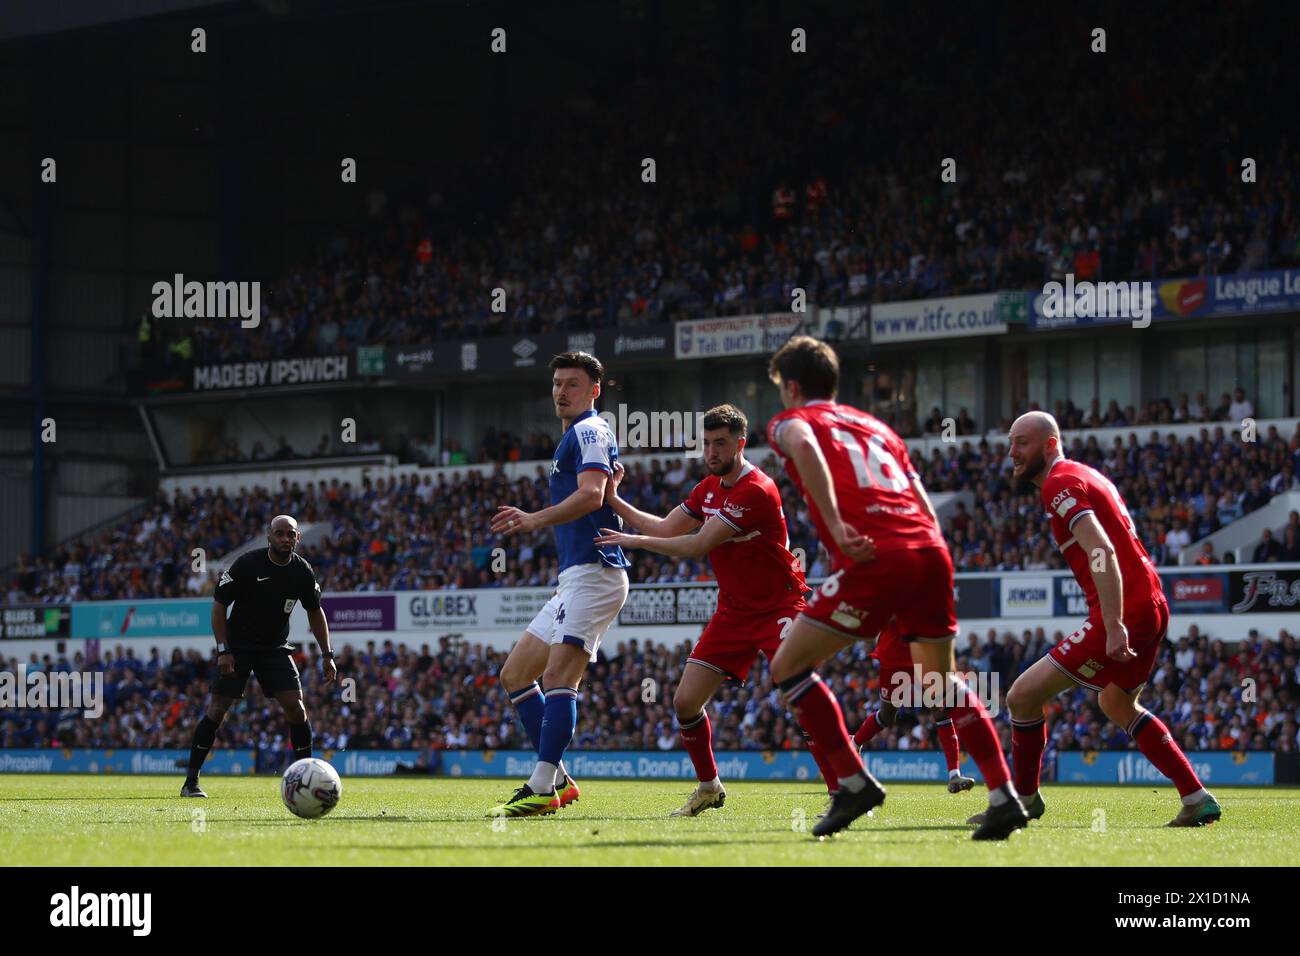 Kieffer Moore of Ipswich Town - Ipswich Town v Middlesbrough, Sky Bet Championship, Portman Road, Ipswich, Royaume-Uni - 13 avril 2024 usage éditorial exclusif - restrictions DataCo applicables Banque D'Images